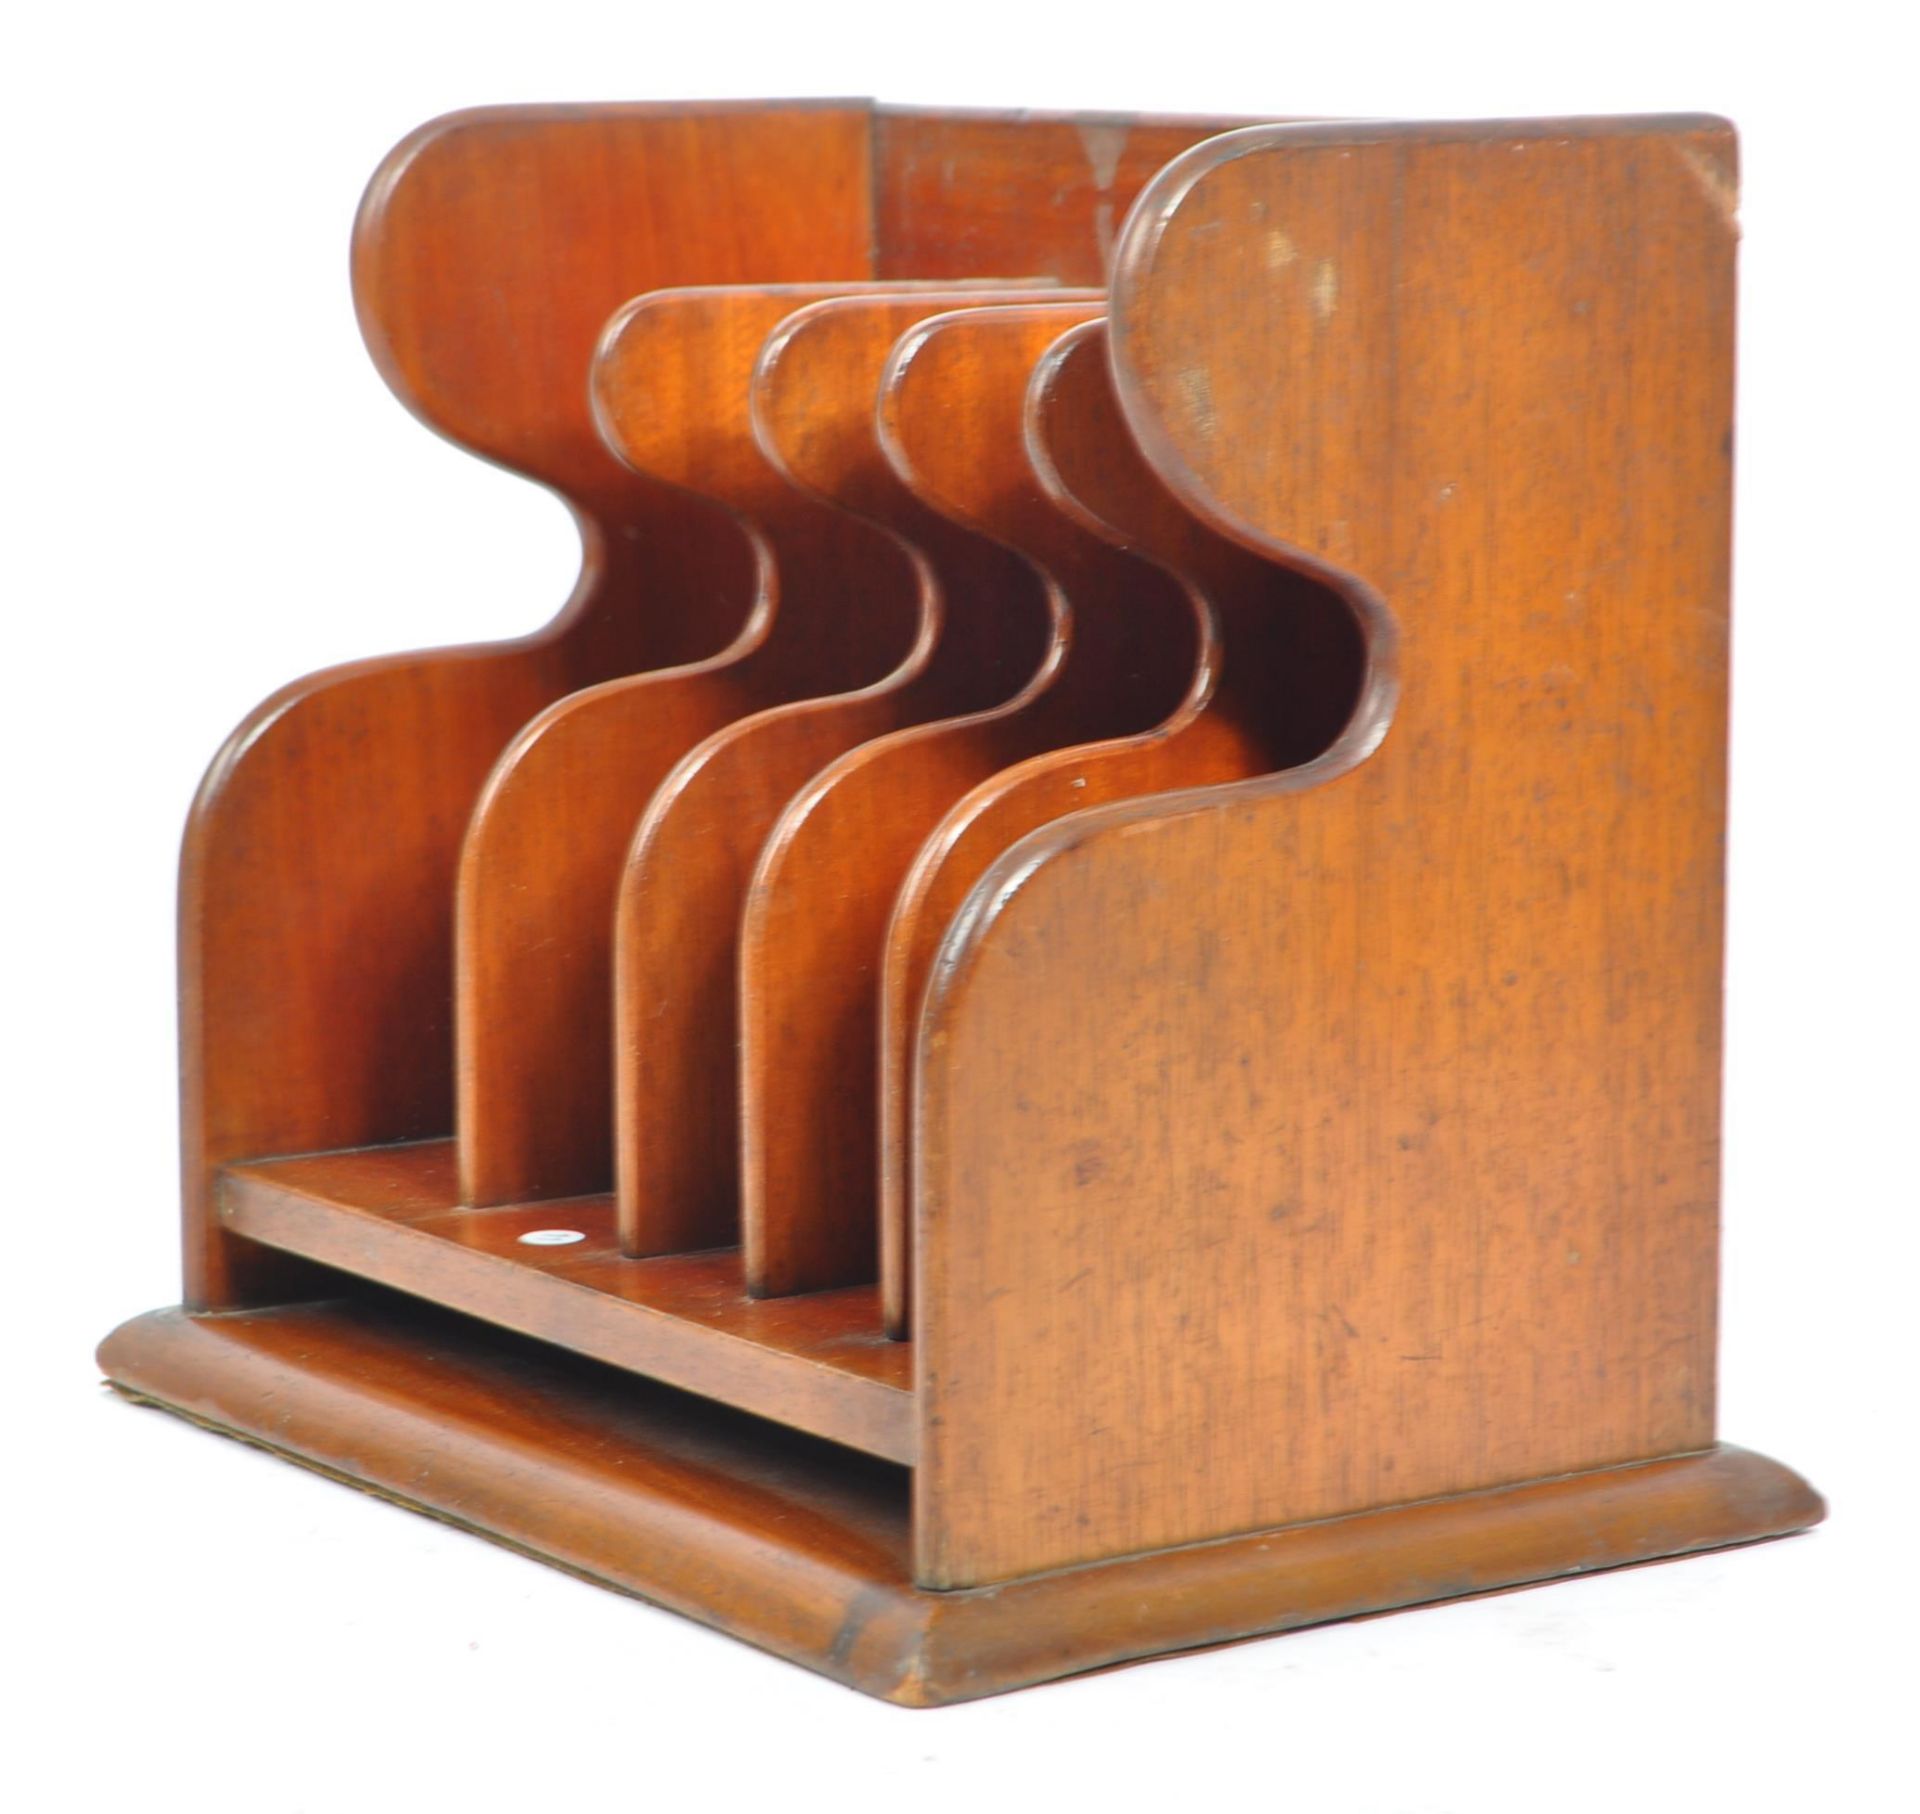 EARLY 20TH CENTURY MAHOGANY WOOD DESK LETTER RACK - Image 2 of 6